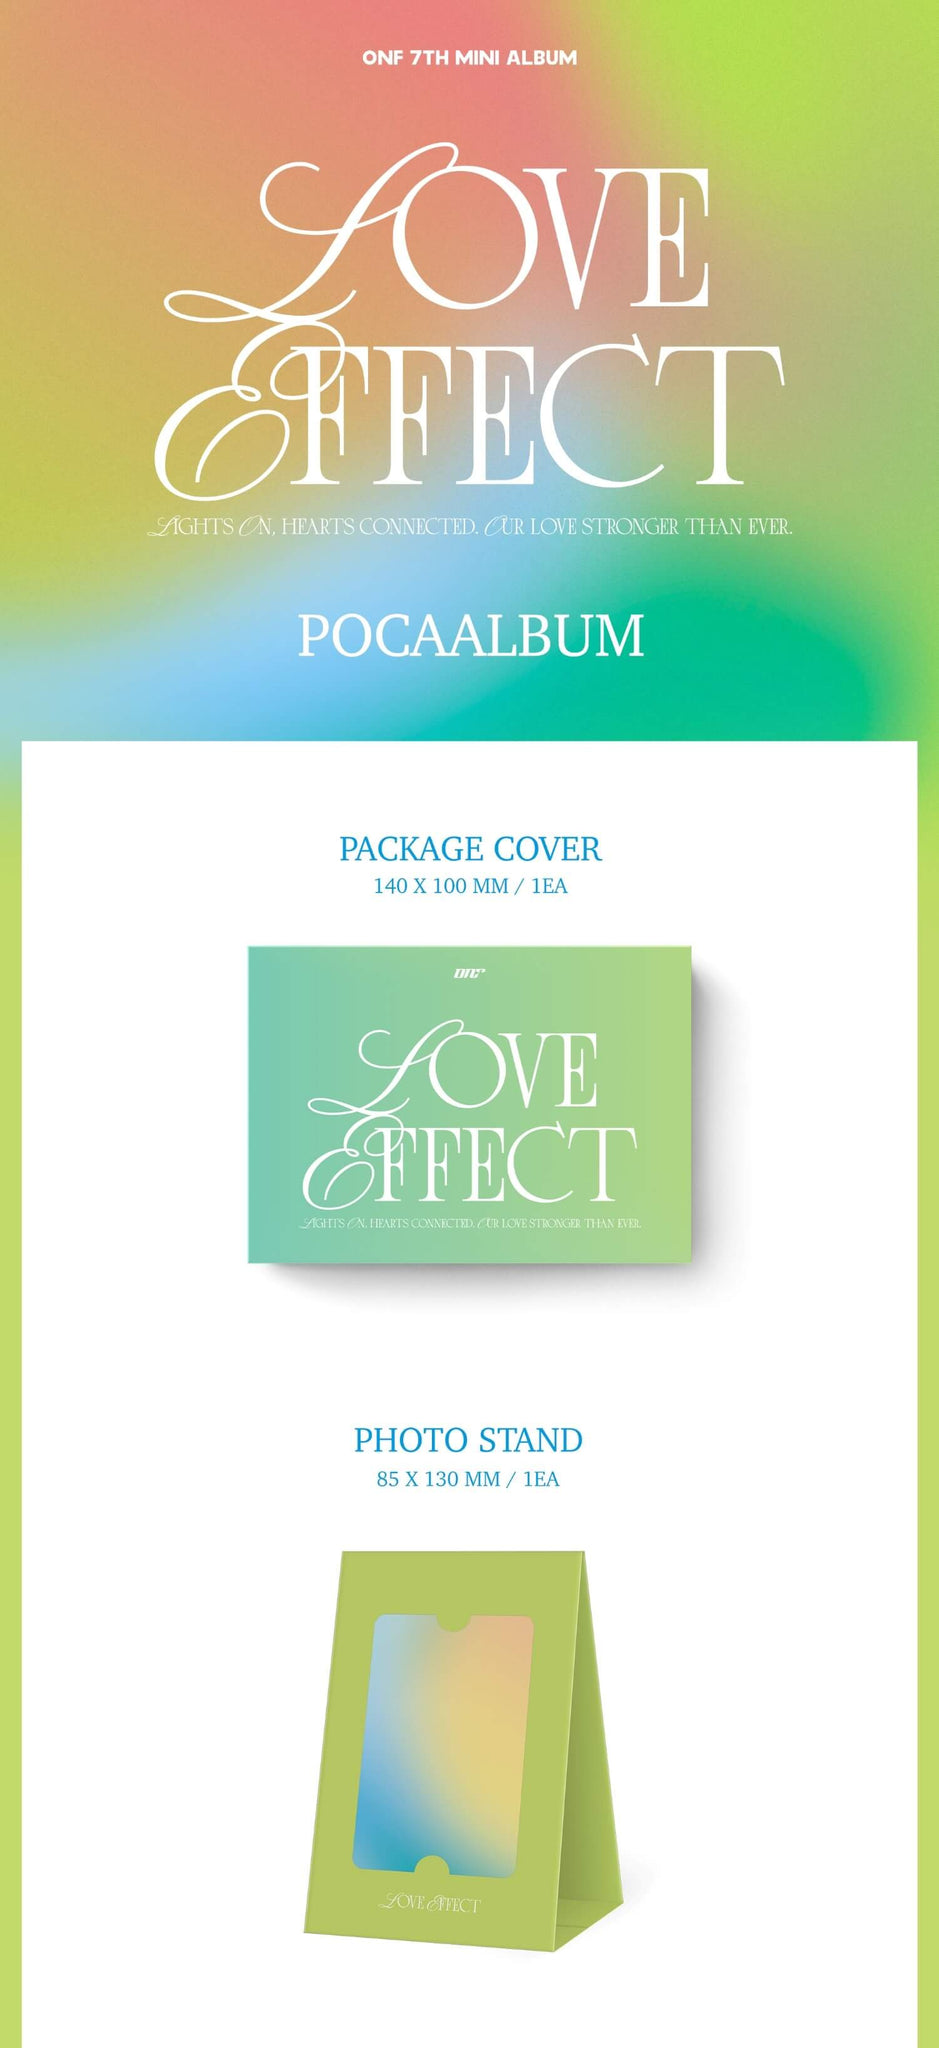 ONF 7th Mini Album LOVE EFFECT POCA Version Inclusions Package Cover Photo Stand